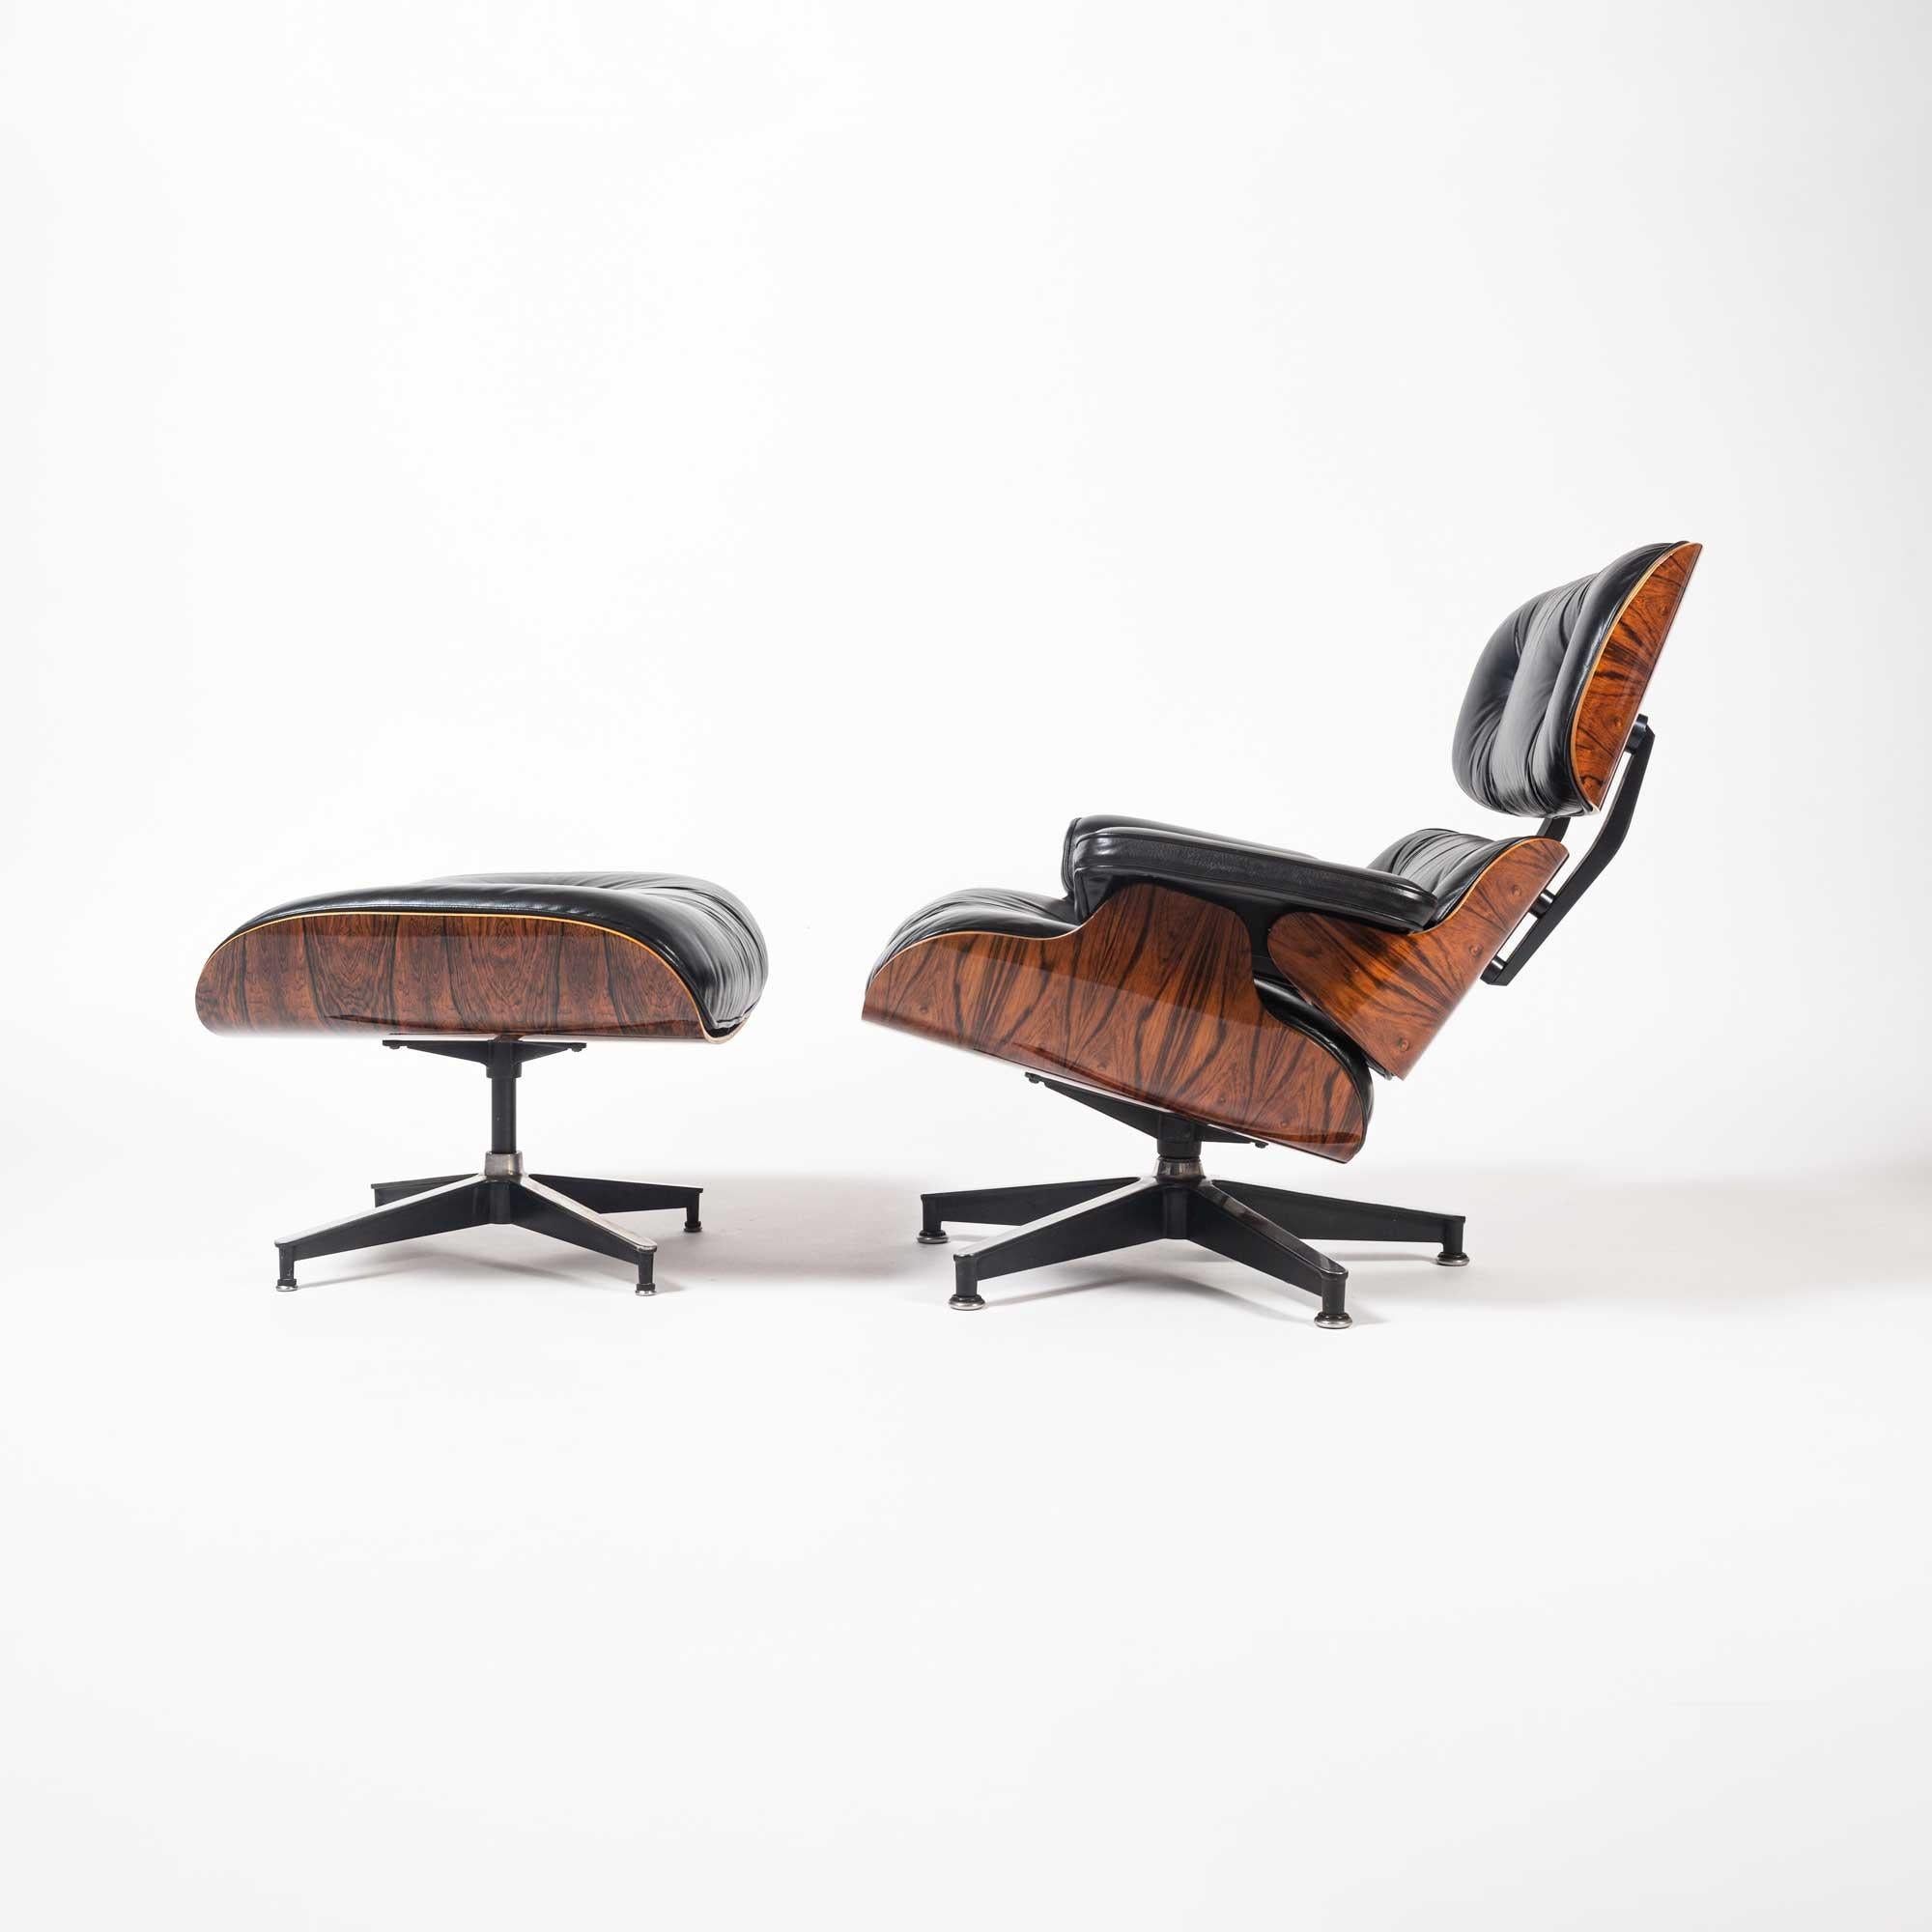 3rd Gen Eames lounge chair with ottoman fully restored. New shock mounts, restored original leather and oiled shells, re-polished steel frame.